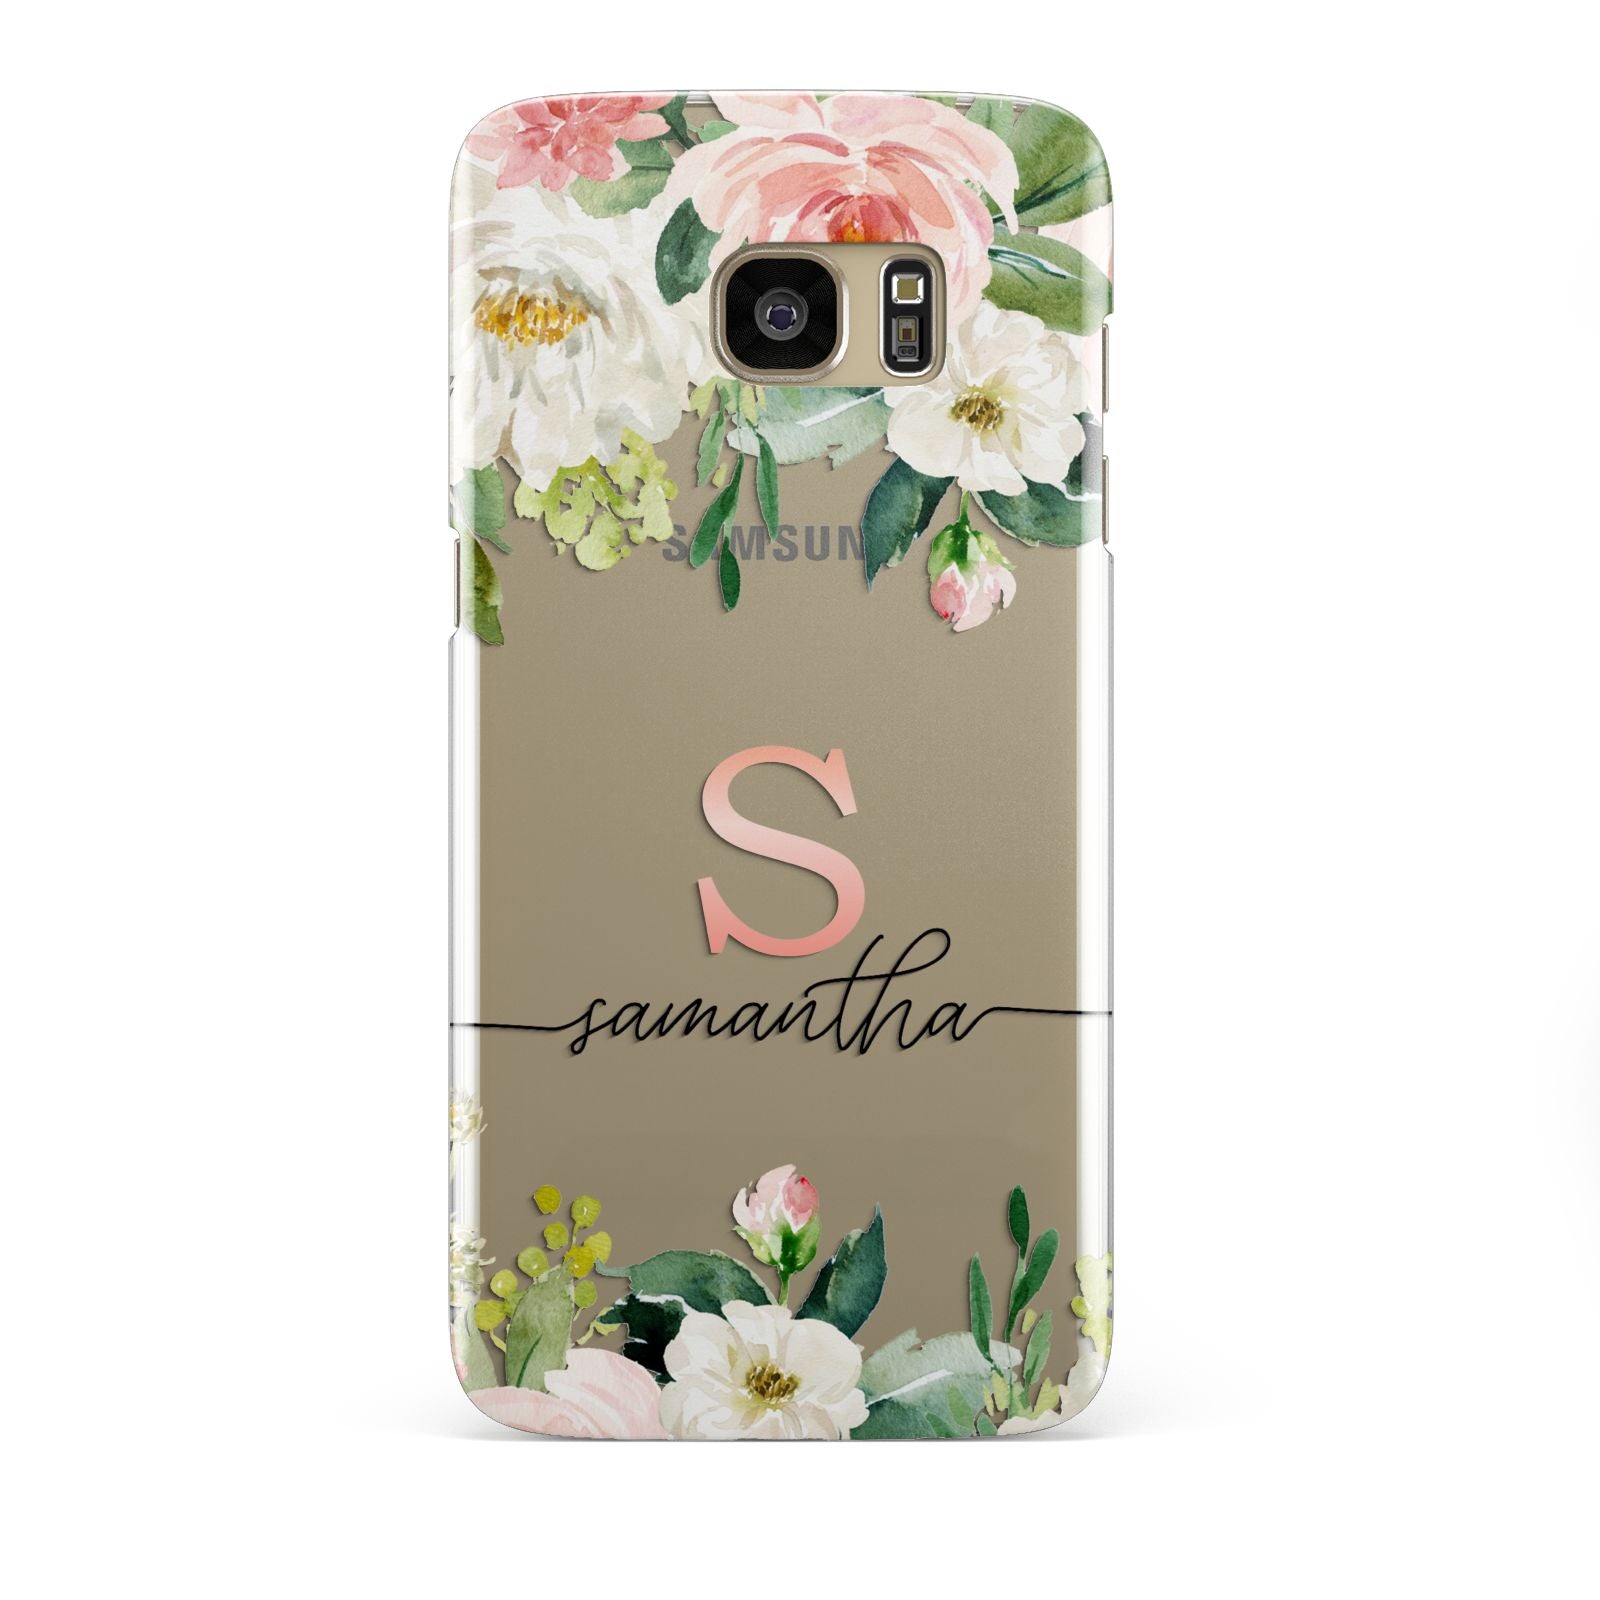 Monogrammed Floral Roses Samsung Galaxy S7 Edge Case